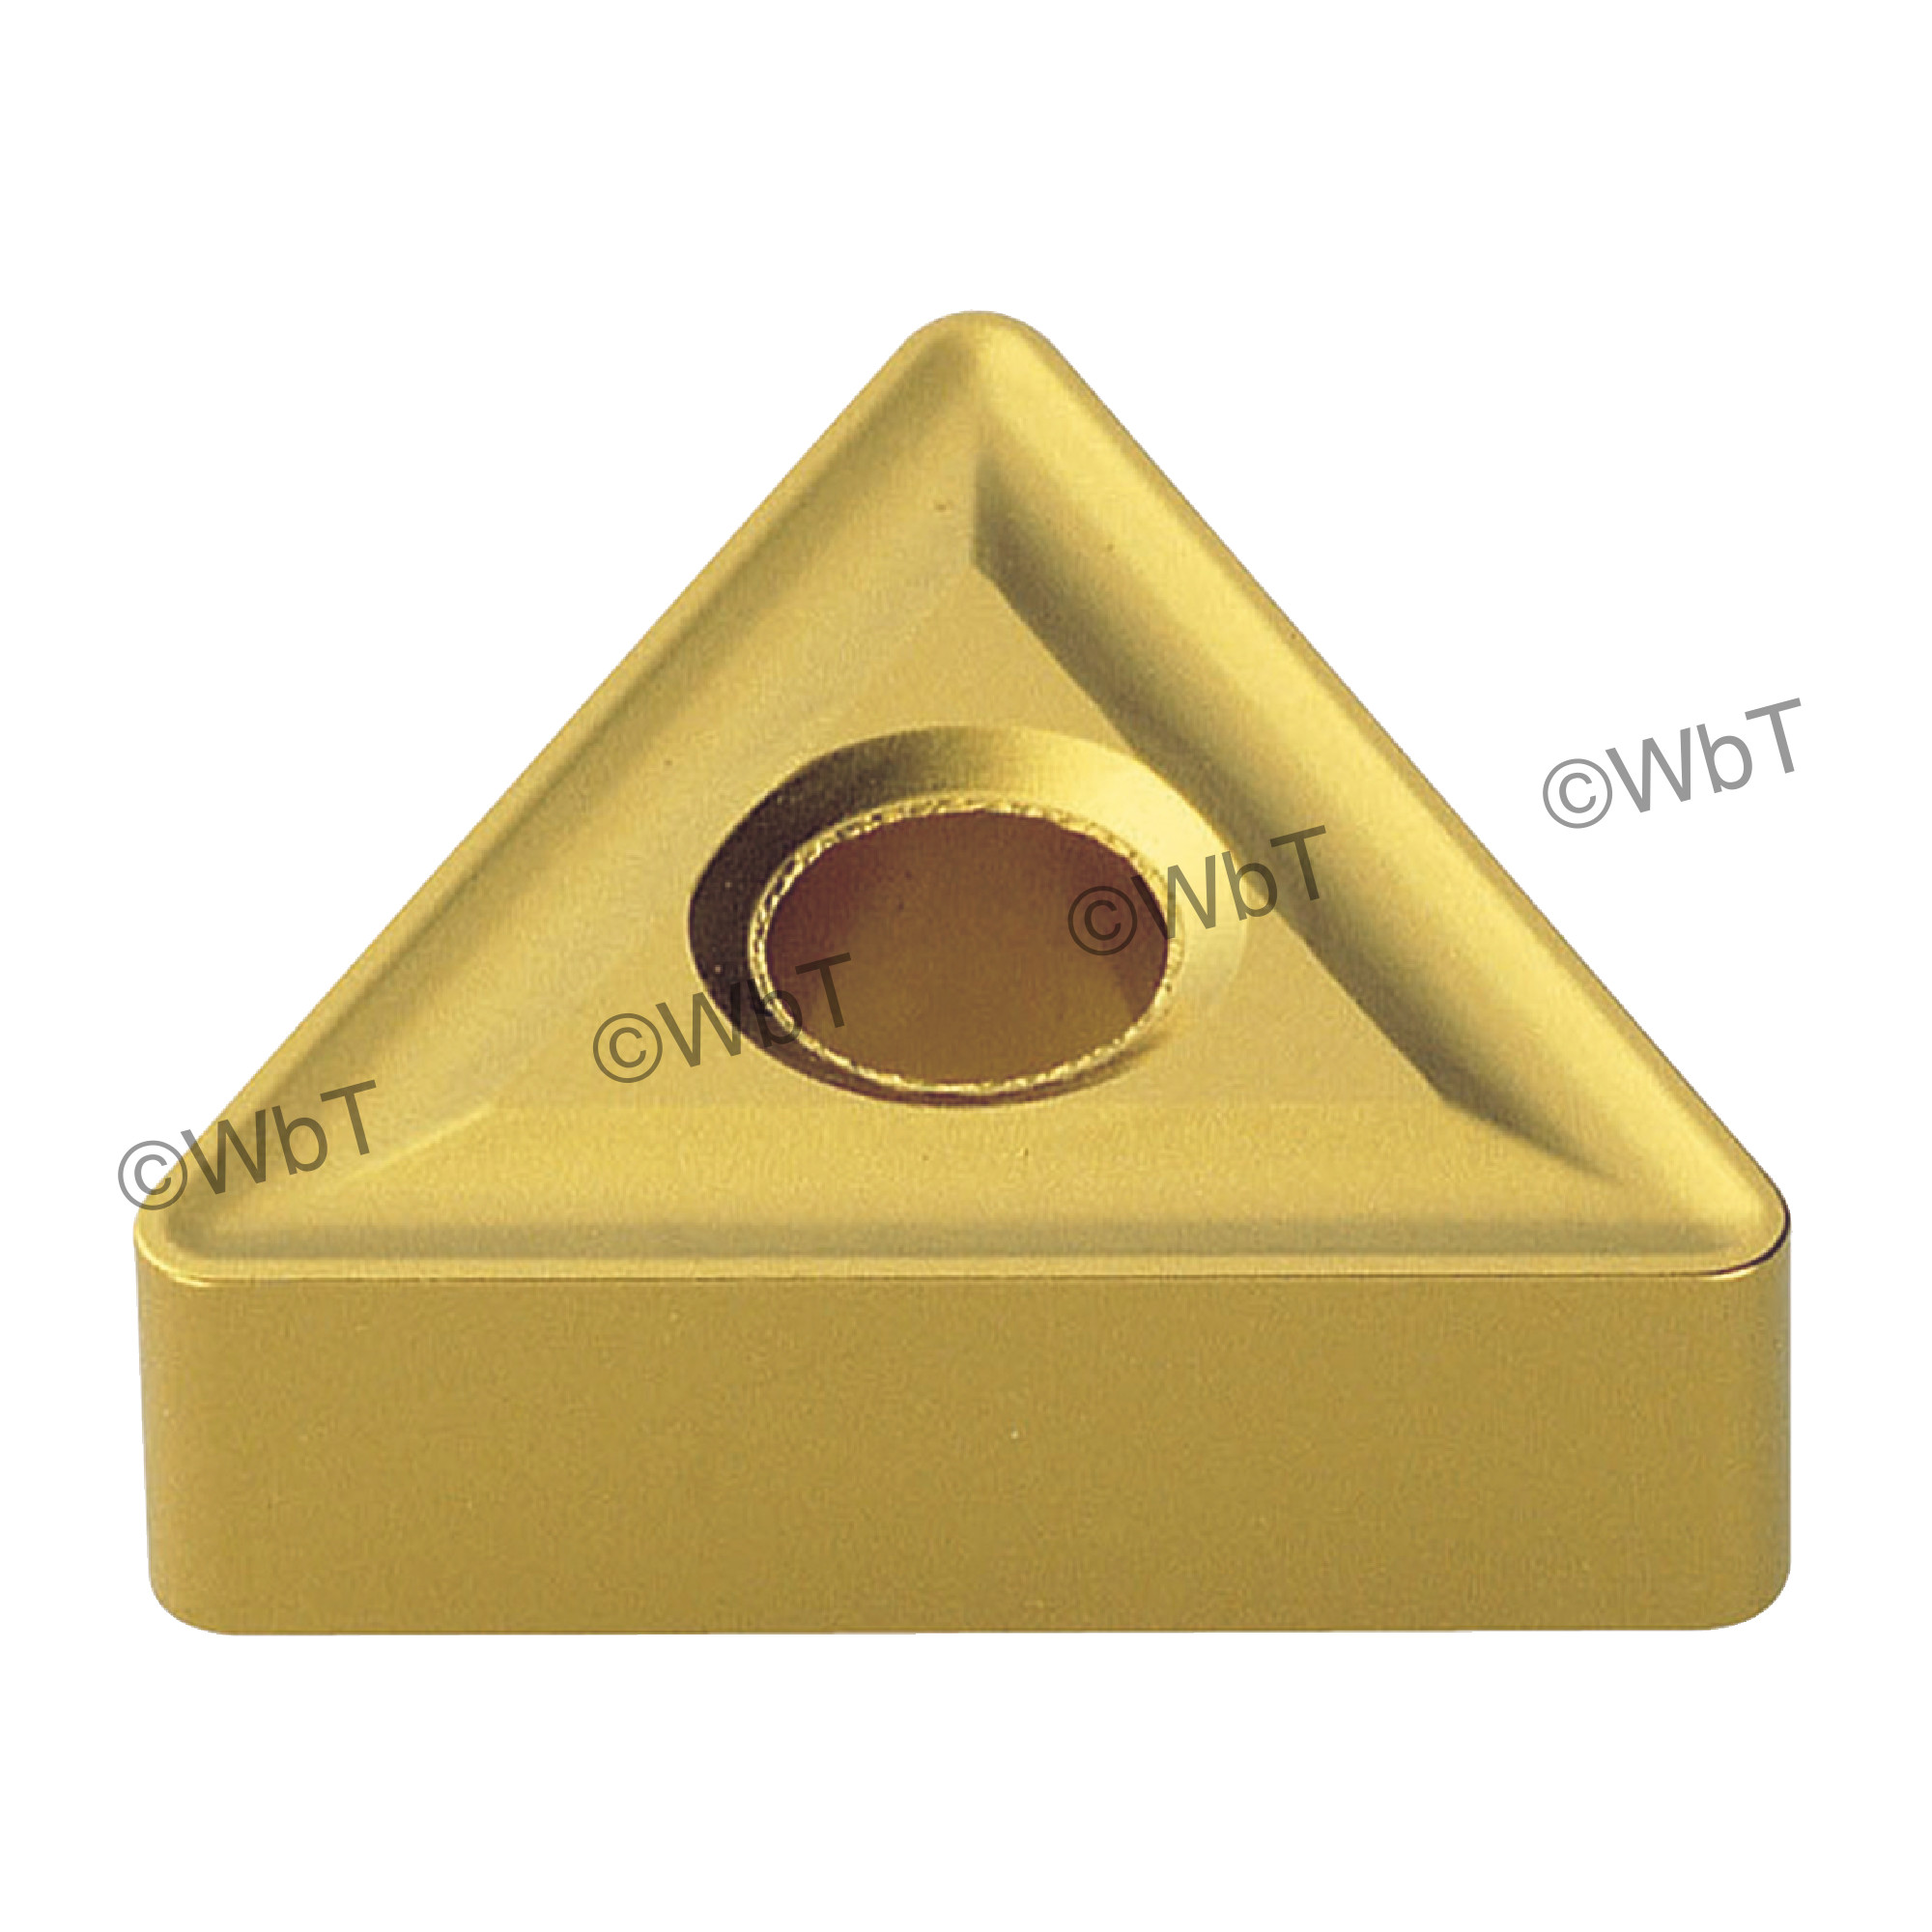 ARNO - TCMT3(2.5)1A-PM1 AM5120 - 60&#176; Triangle / Indexable Carbide Turning Insert